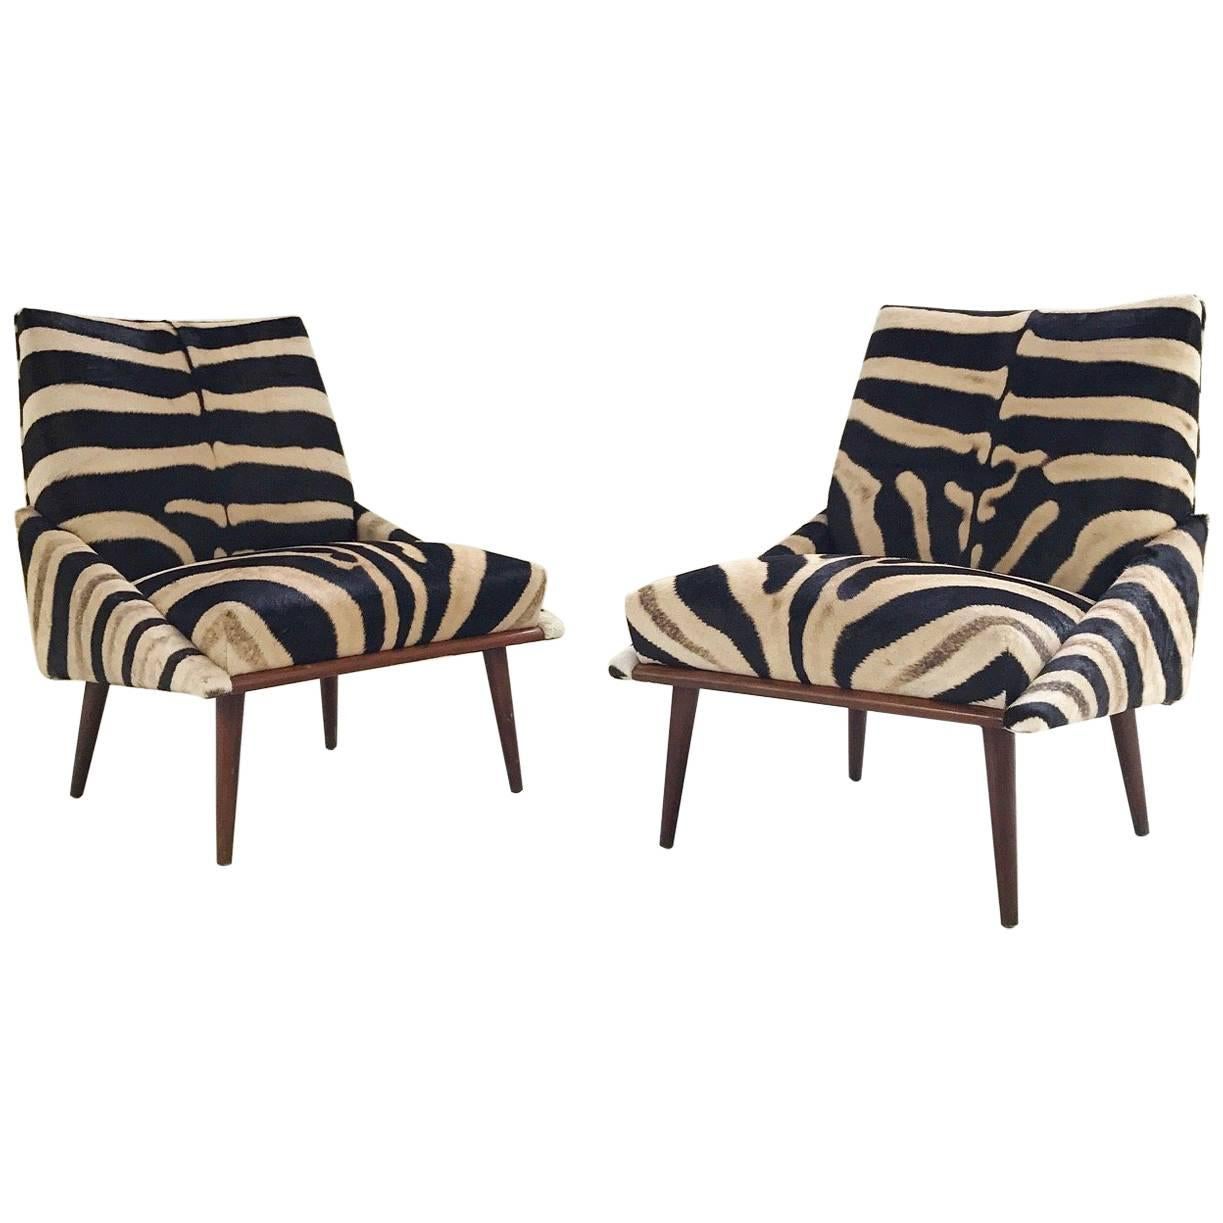 Pair of Adrian Pearsall Style Lounge Chairs Restored in Zebra Hide